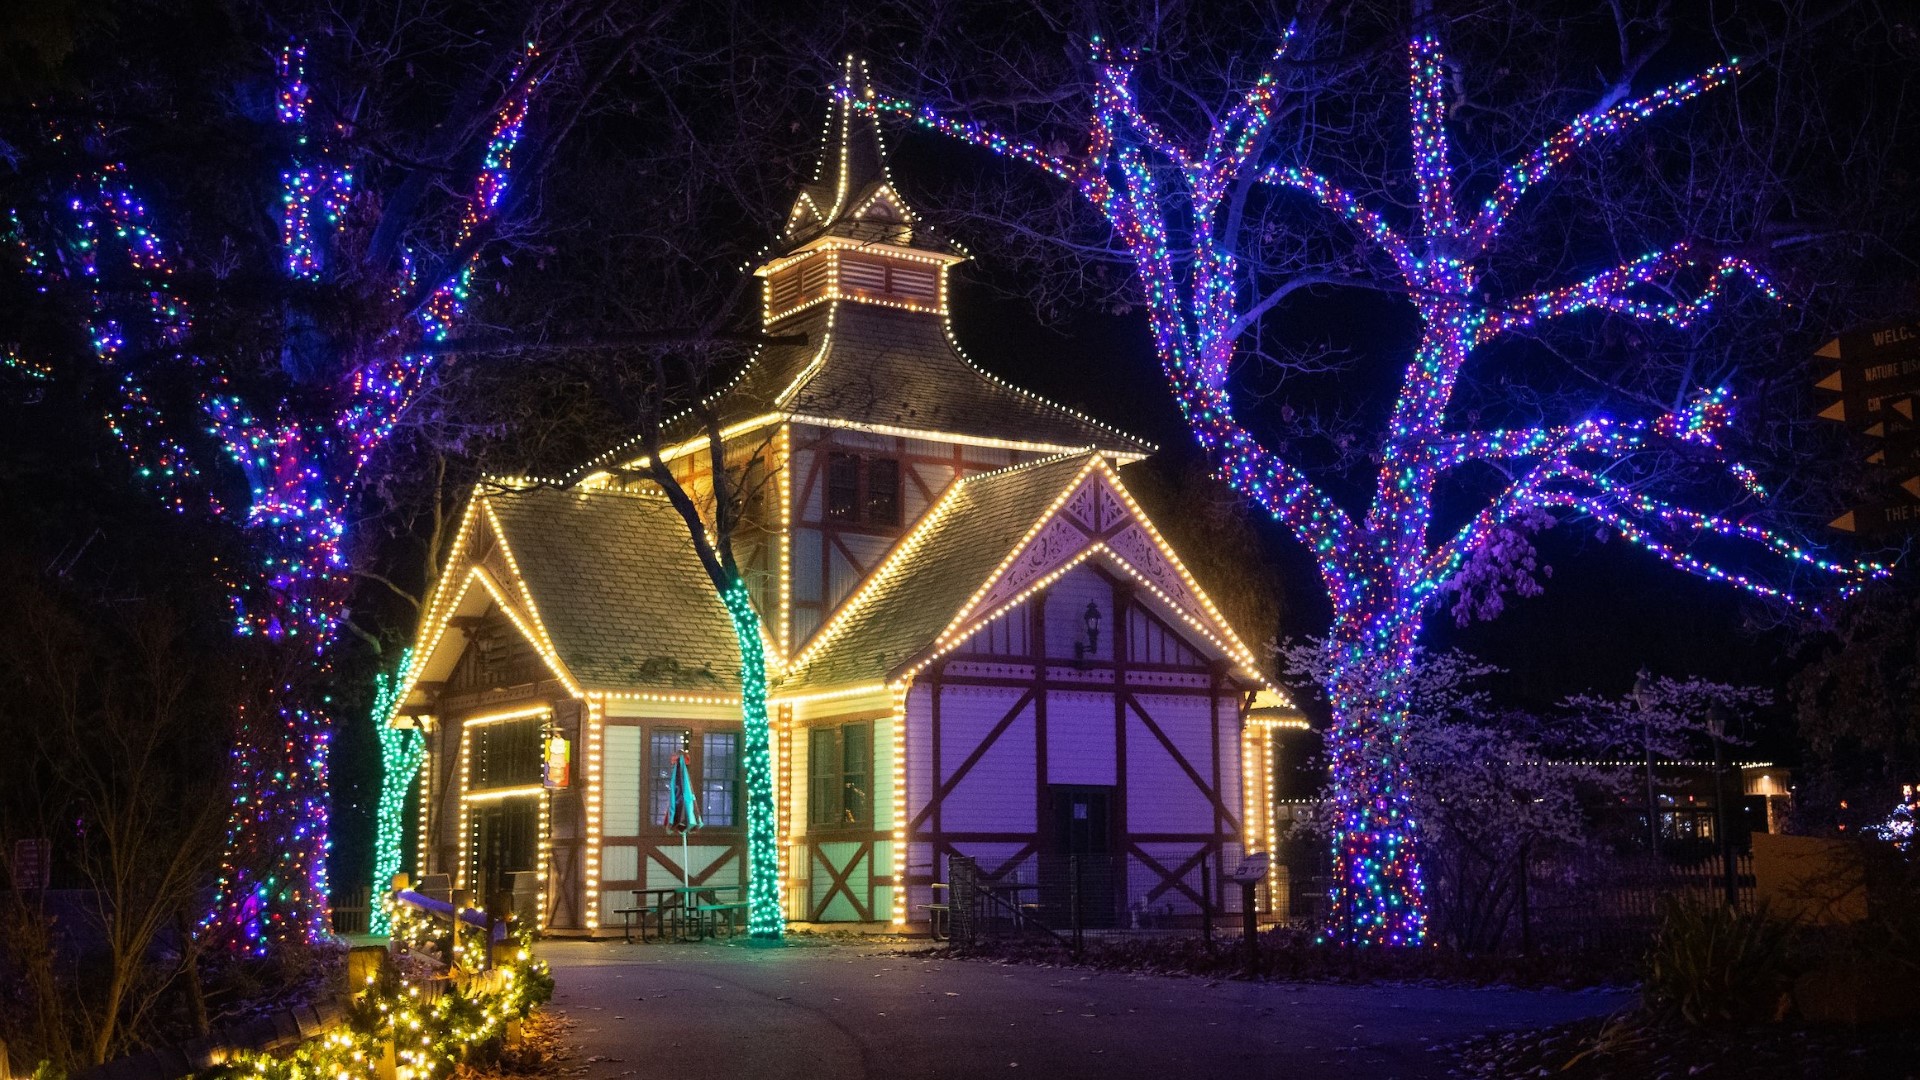 It's back! The Cleveland Zoo has announced the return of their Wild Winter Lights event for the 2021 holiday season.